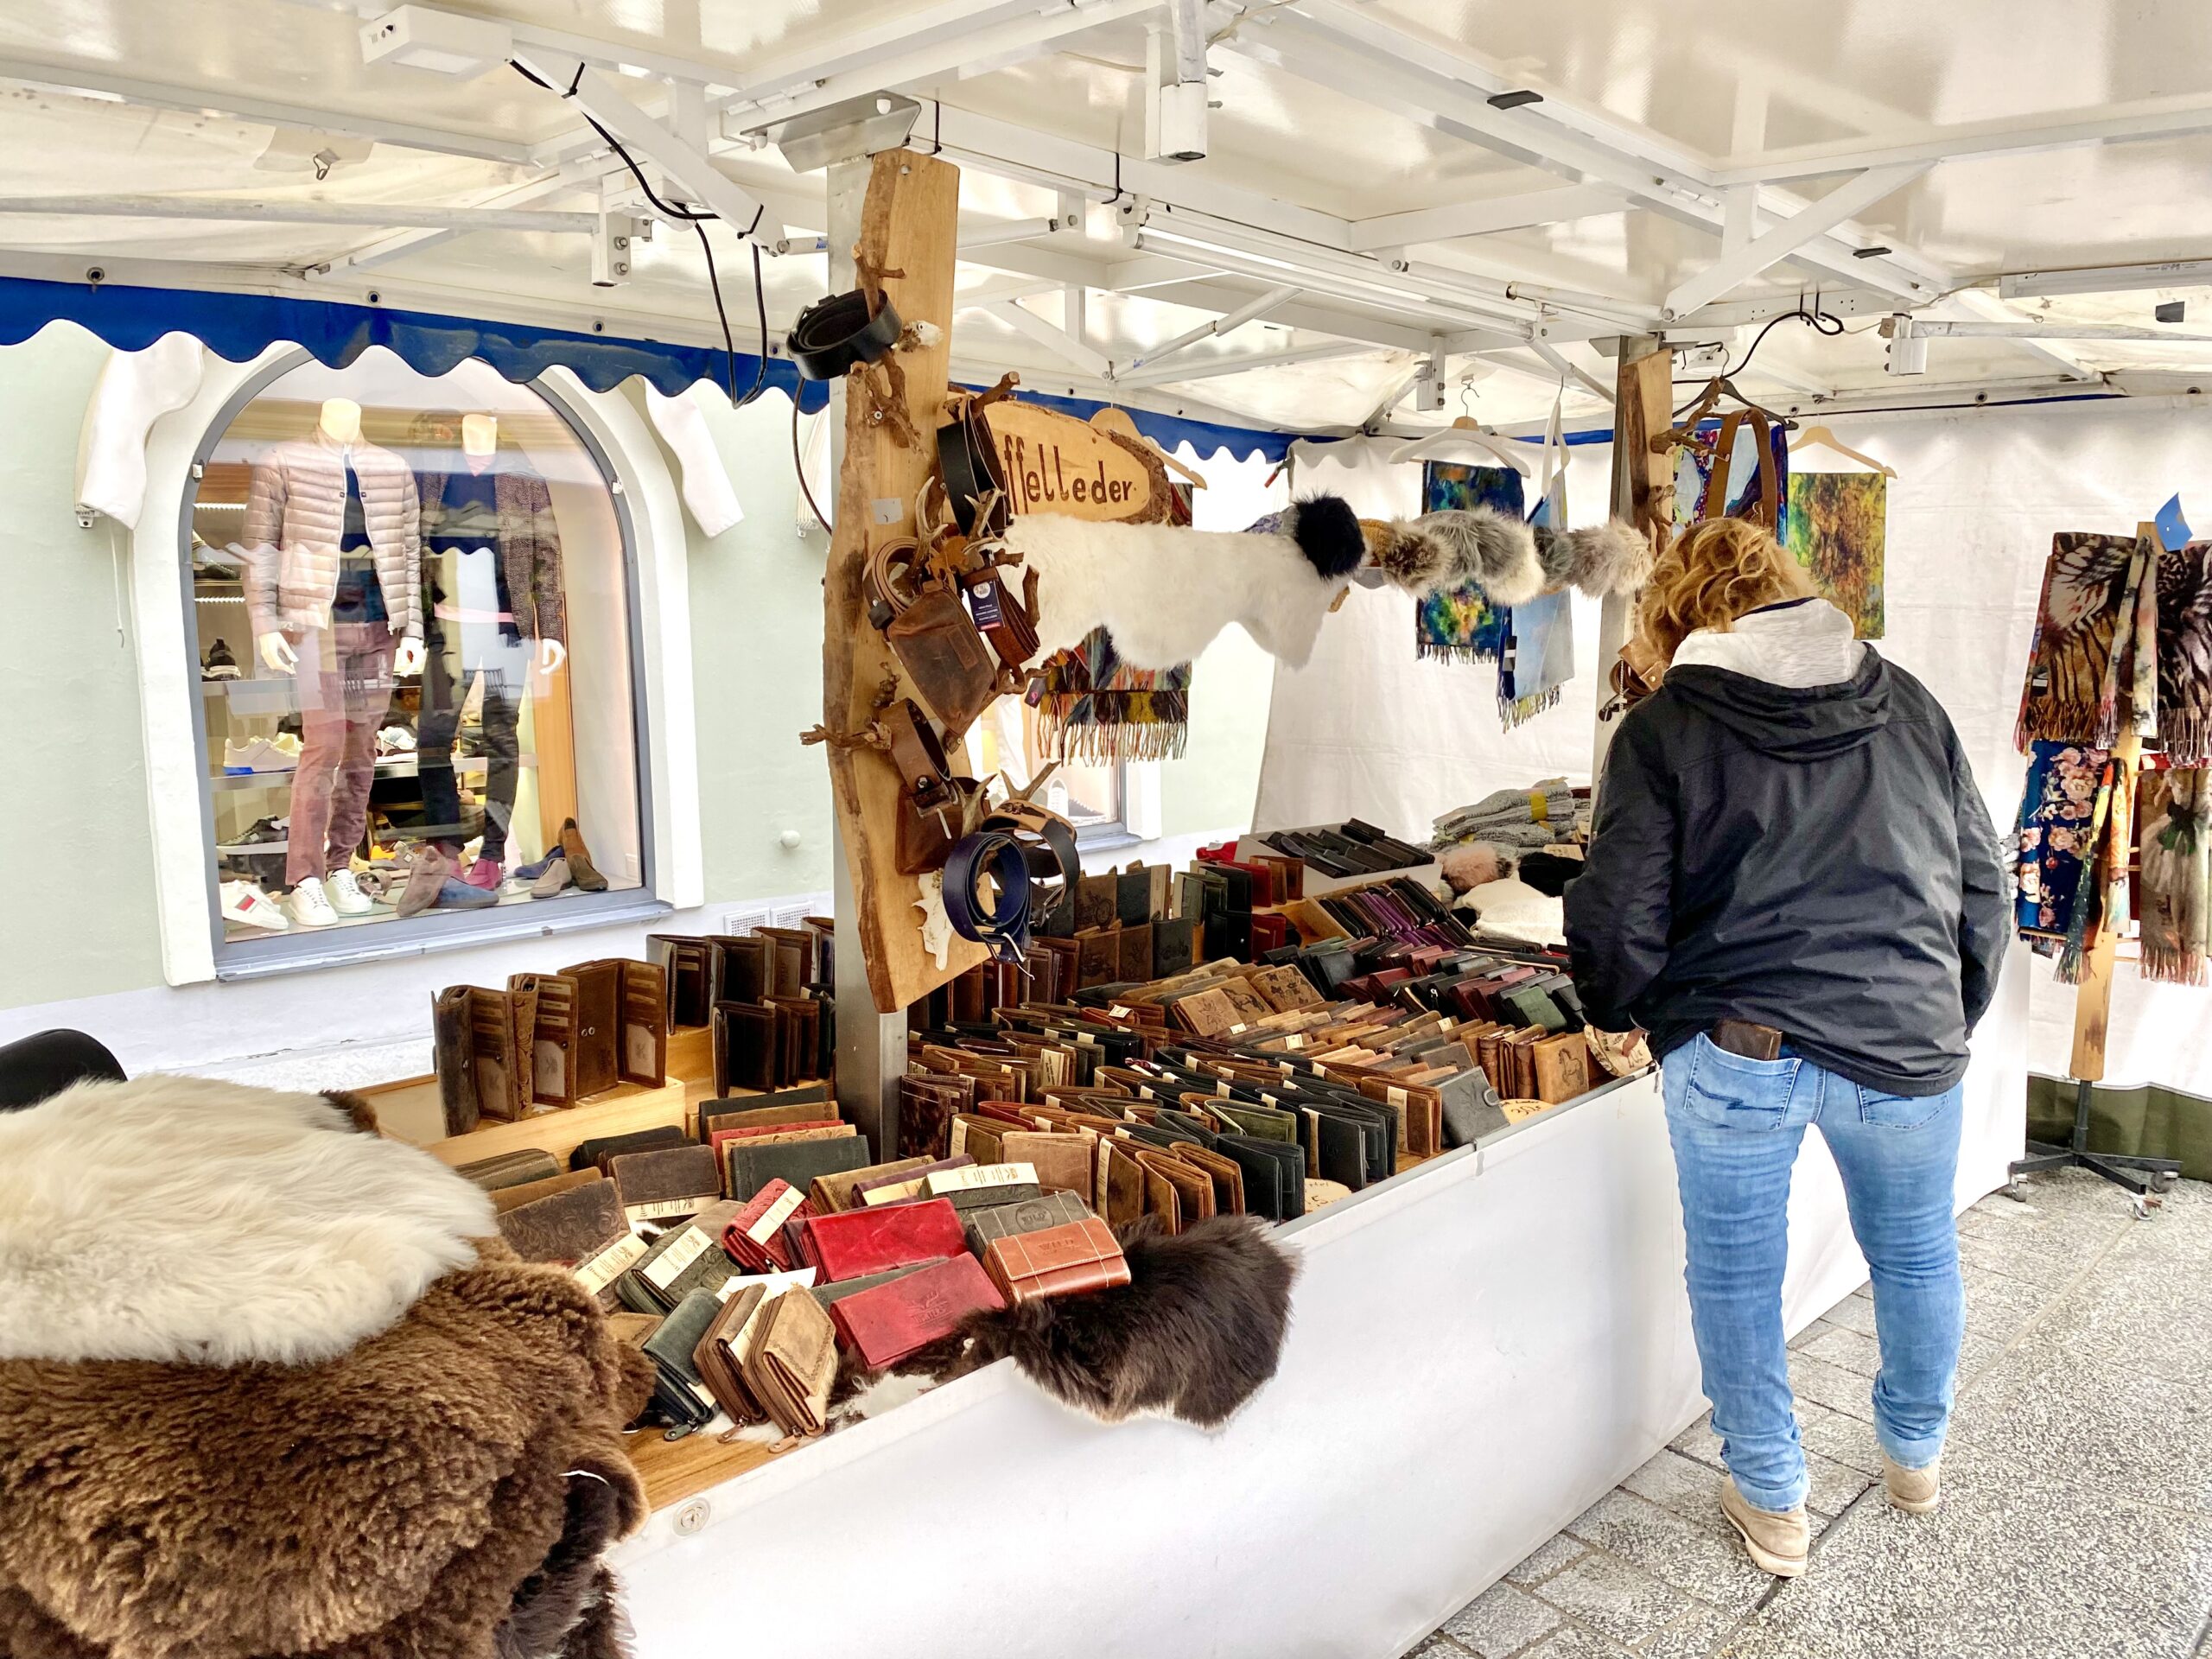 Shopping at a street market in Kitzbuhel (Photo Credit: 2 Dads with Baggage)